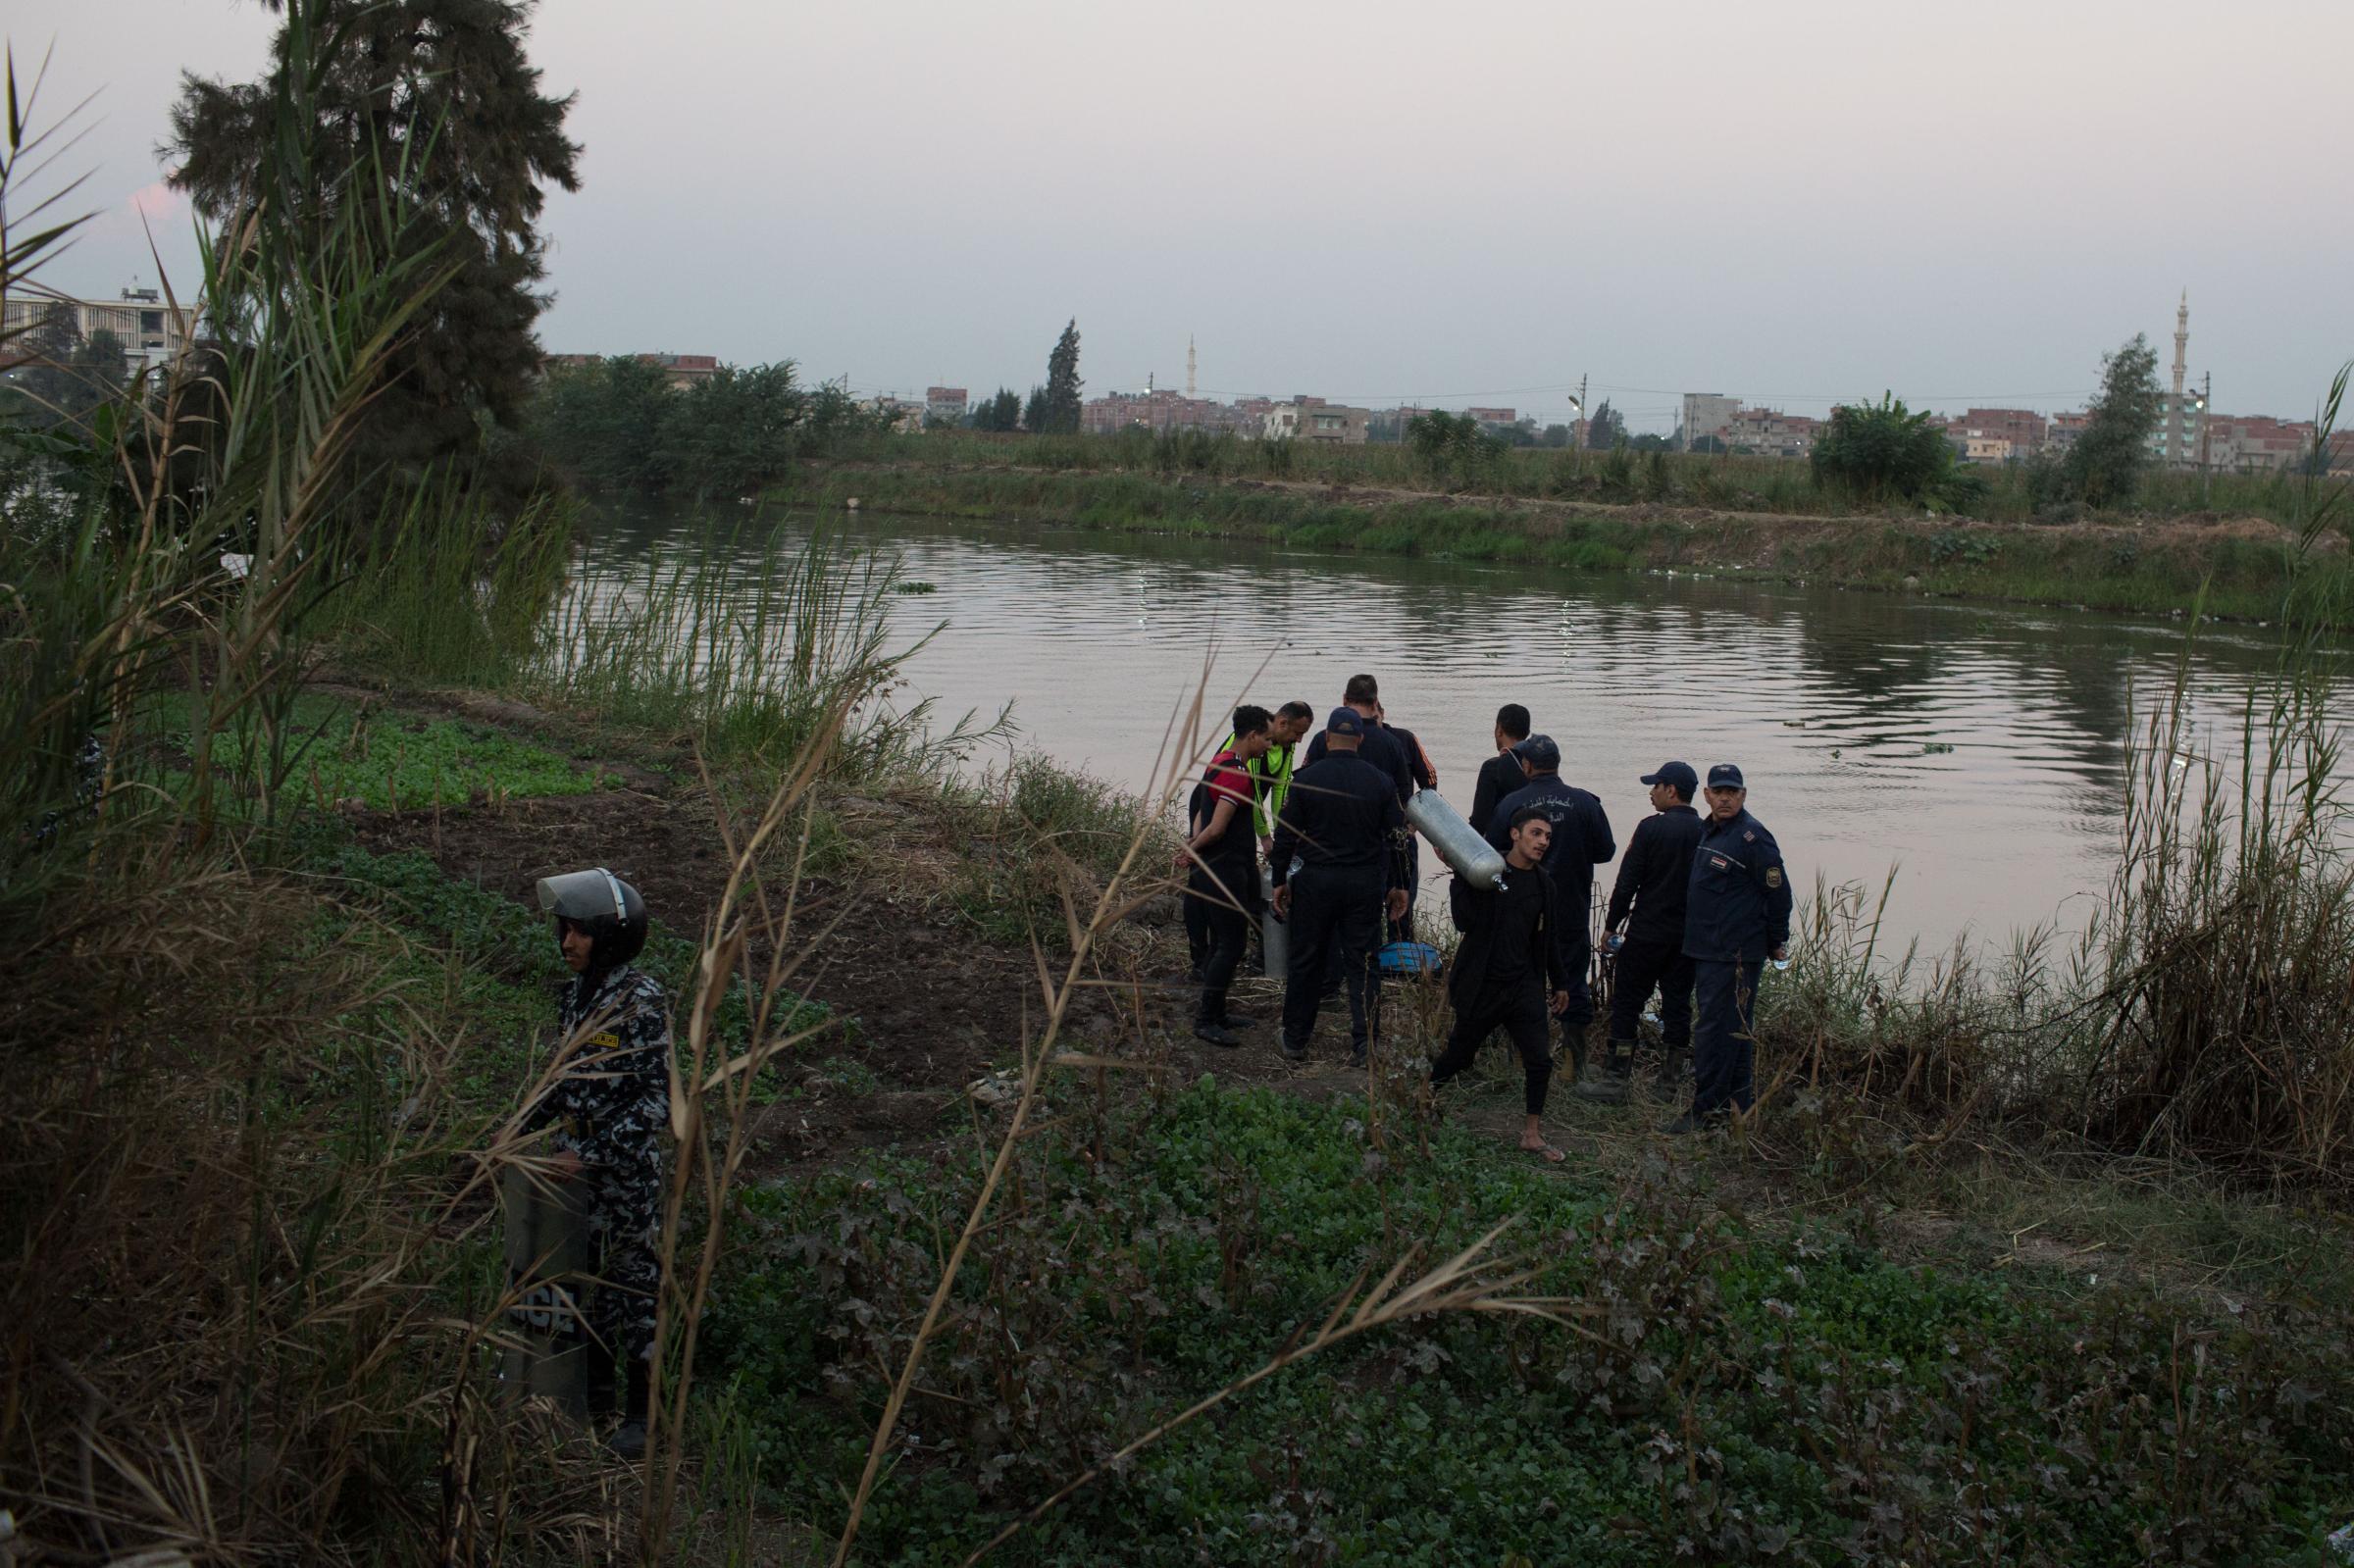  At least 22 people were killed and 7 other injured when the minibus crashed into an irrigation canal in the Nile delta. For REUTERS 